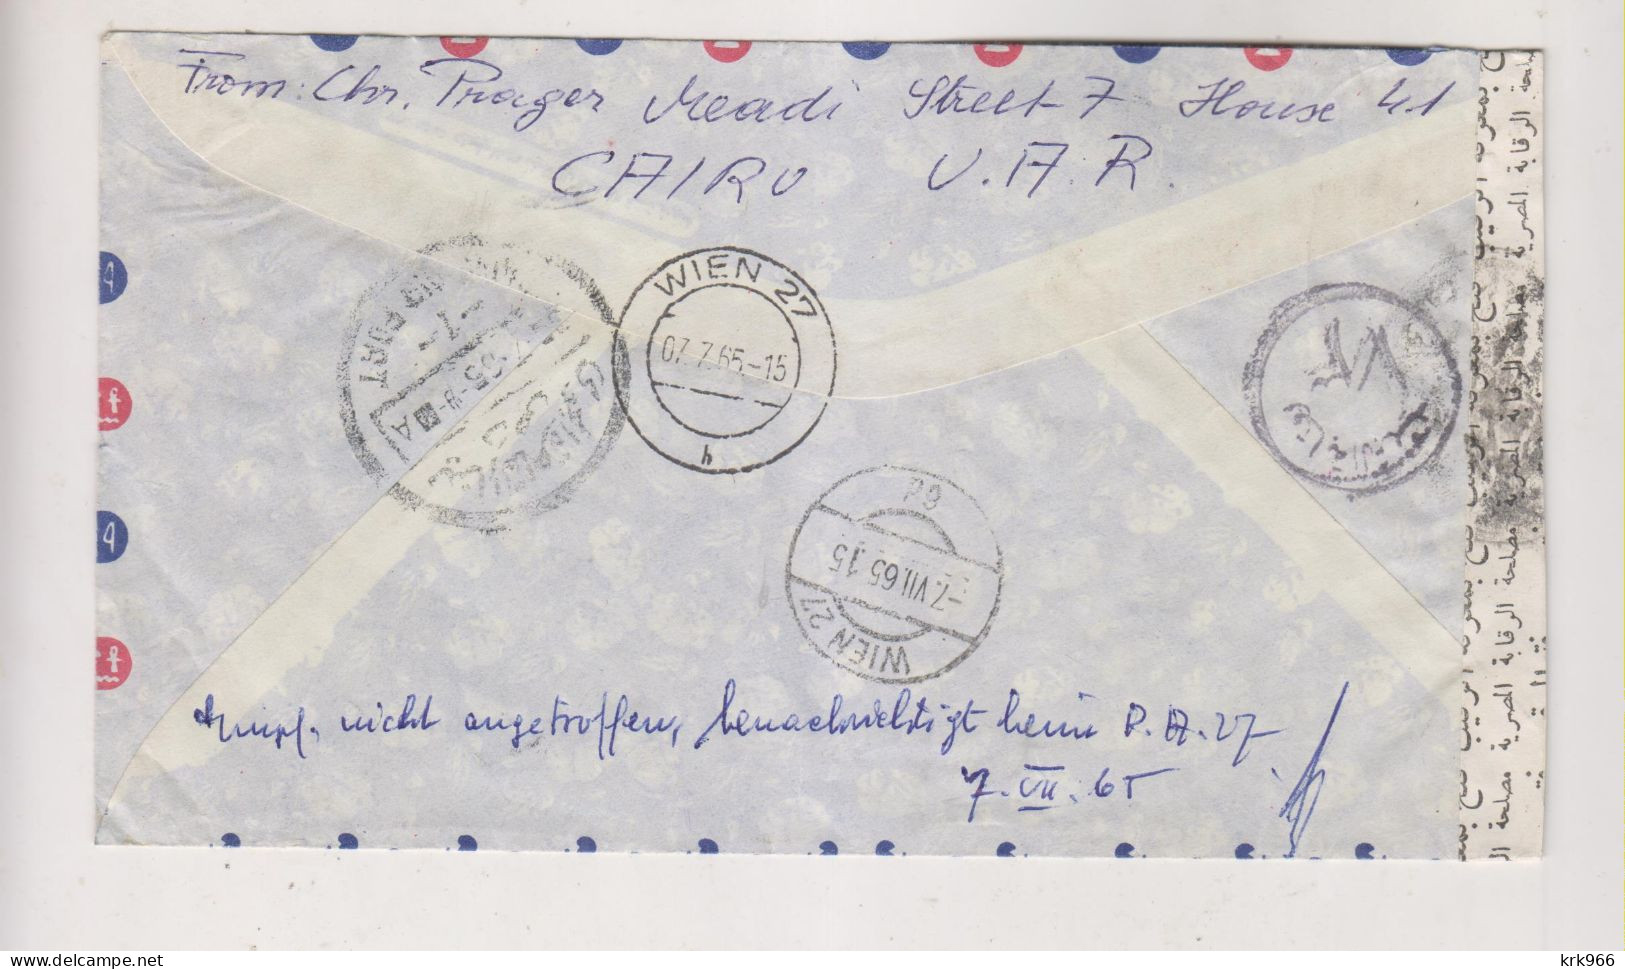 EGYPT 1965 CAIRO MAADI Registered Airmail Cover To Austria - Airmail